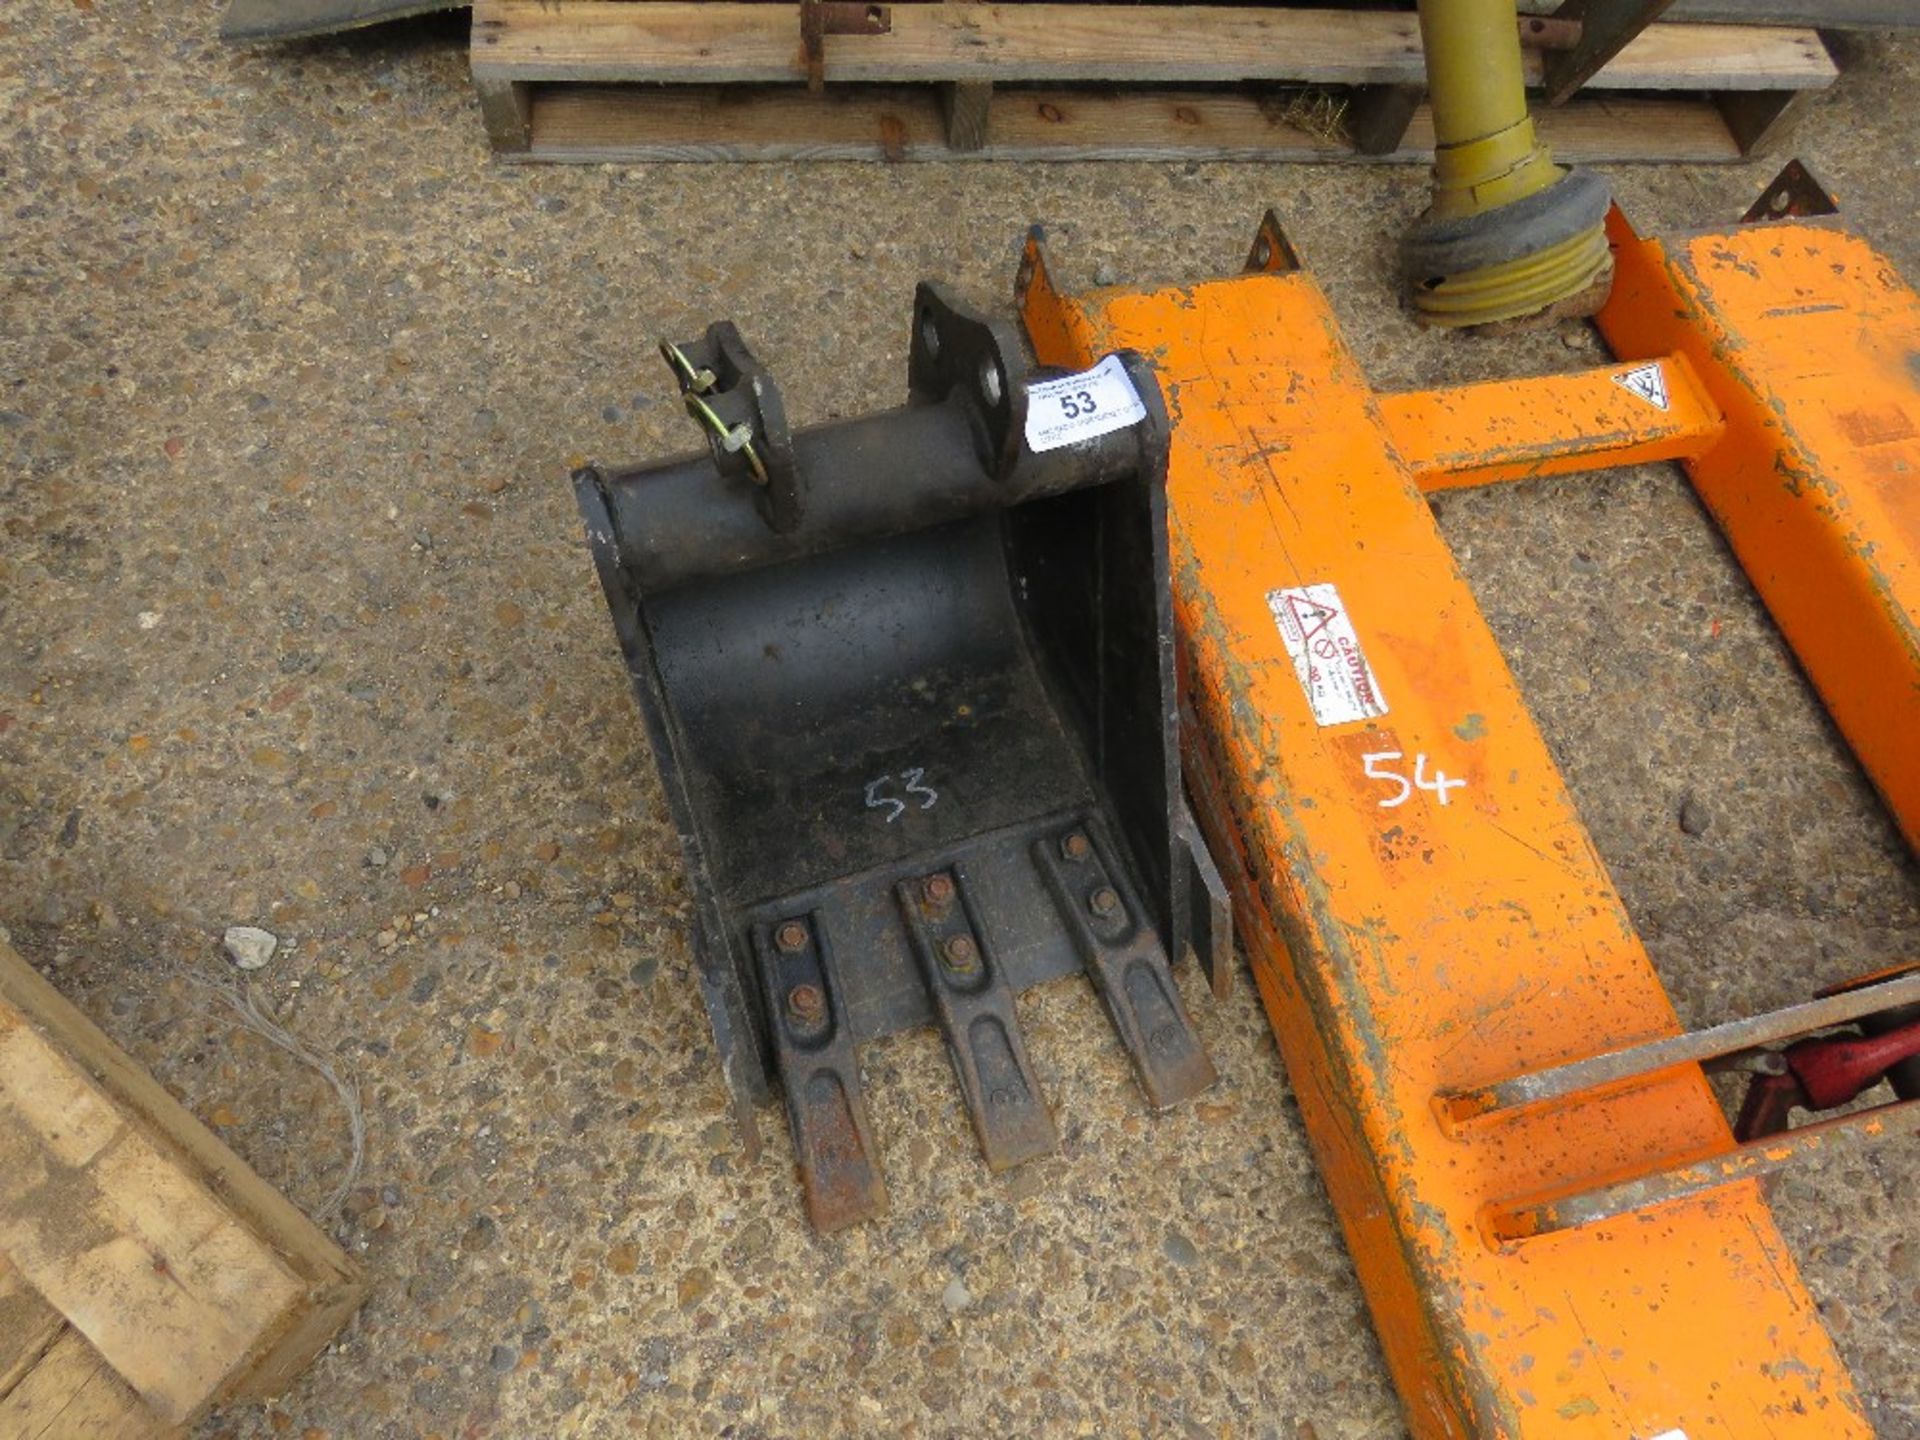 MINI EXCAVATOR BUCKET 12" WIDTH, LITTLE USED. 25MM PINS. DIRECT FROM LOCAL COMPANY DUE TO DEPOT CLOS